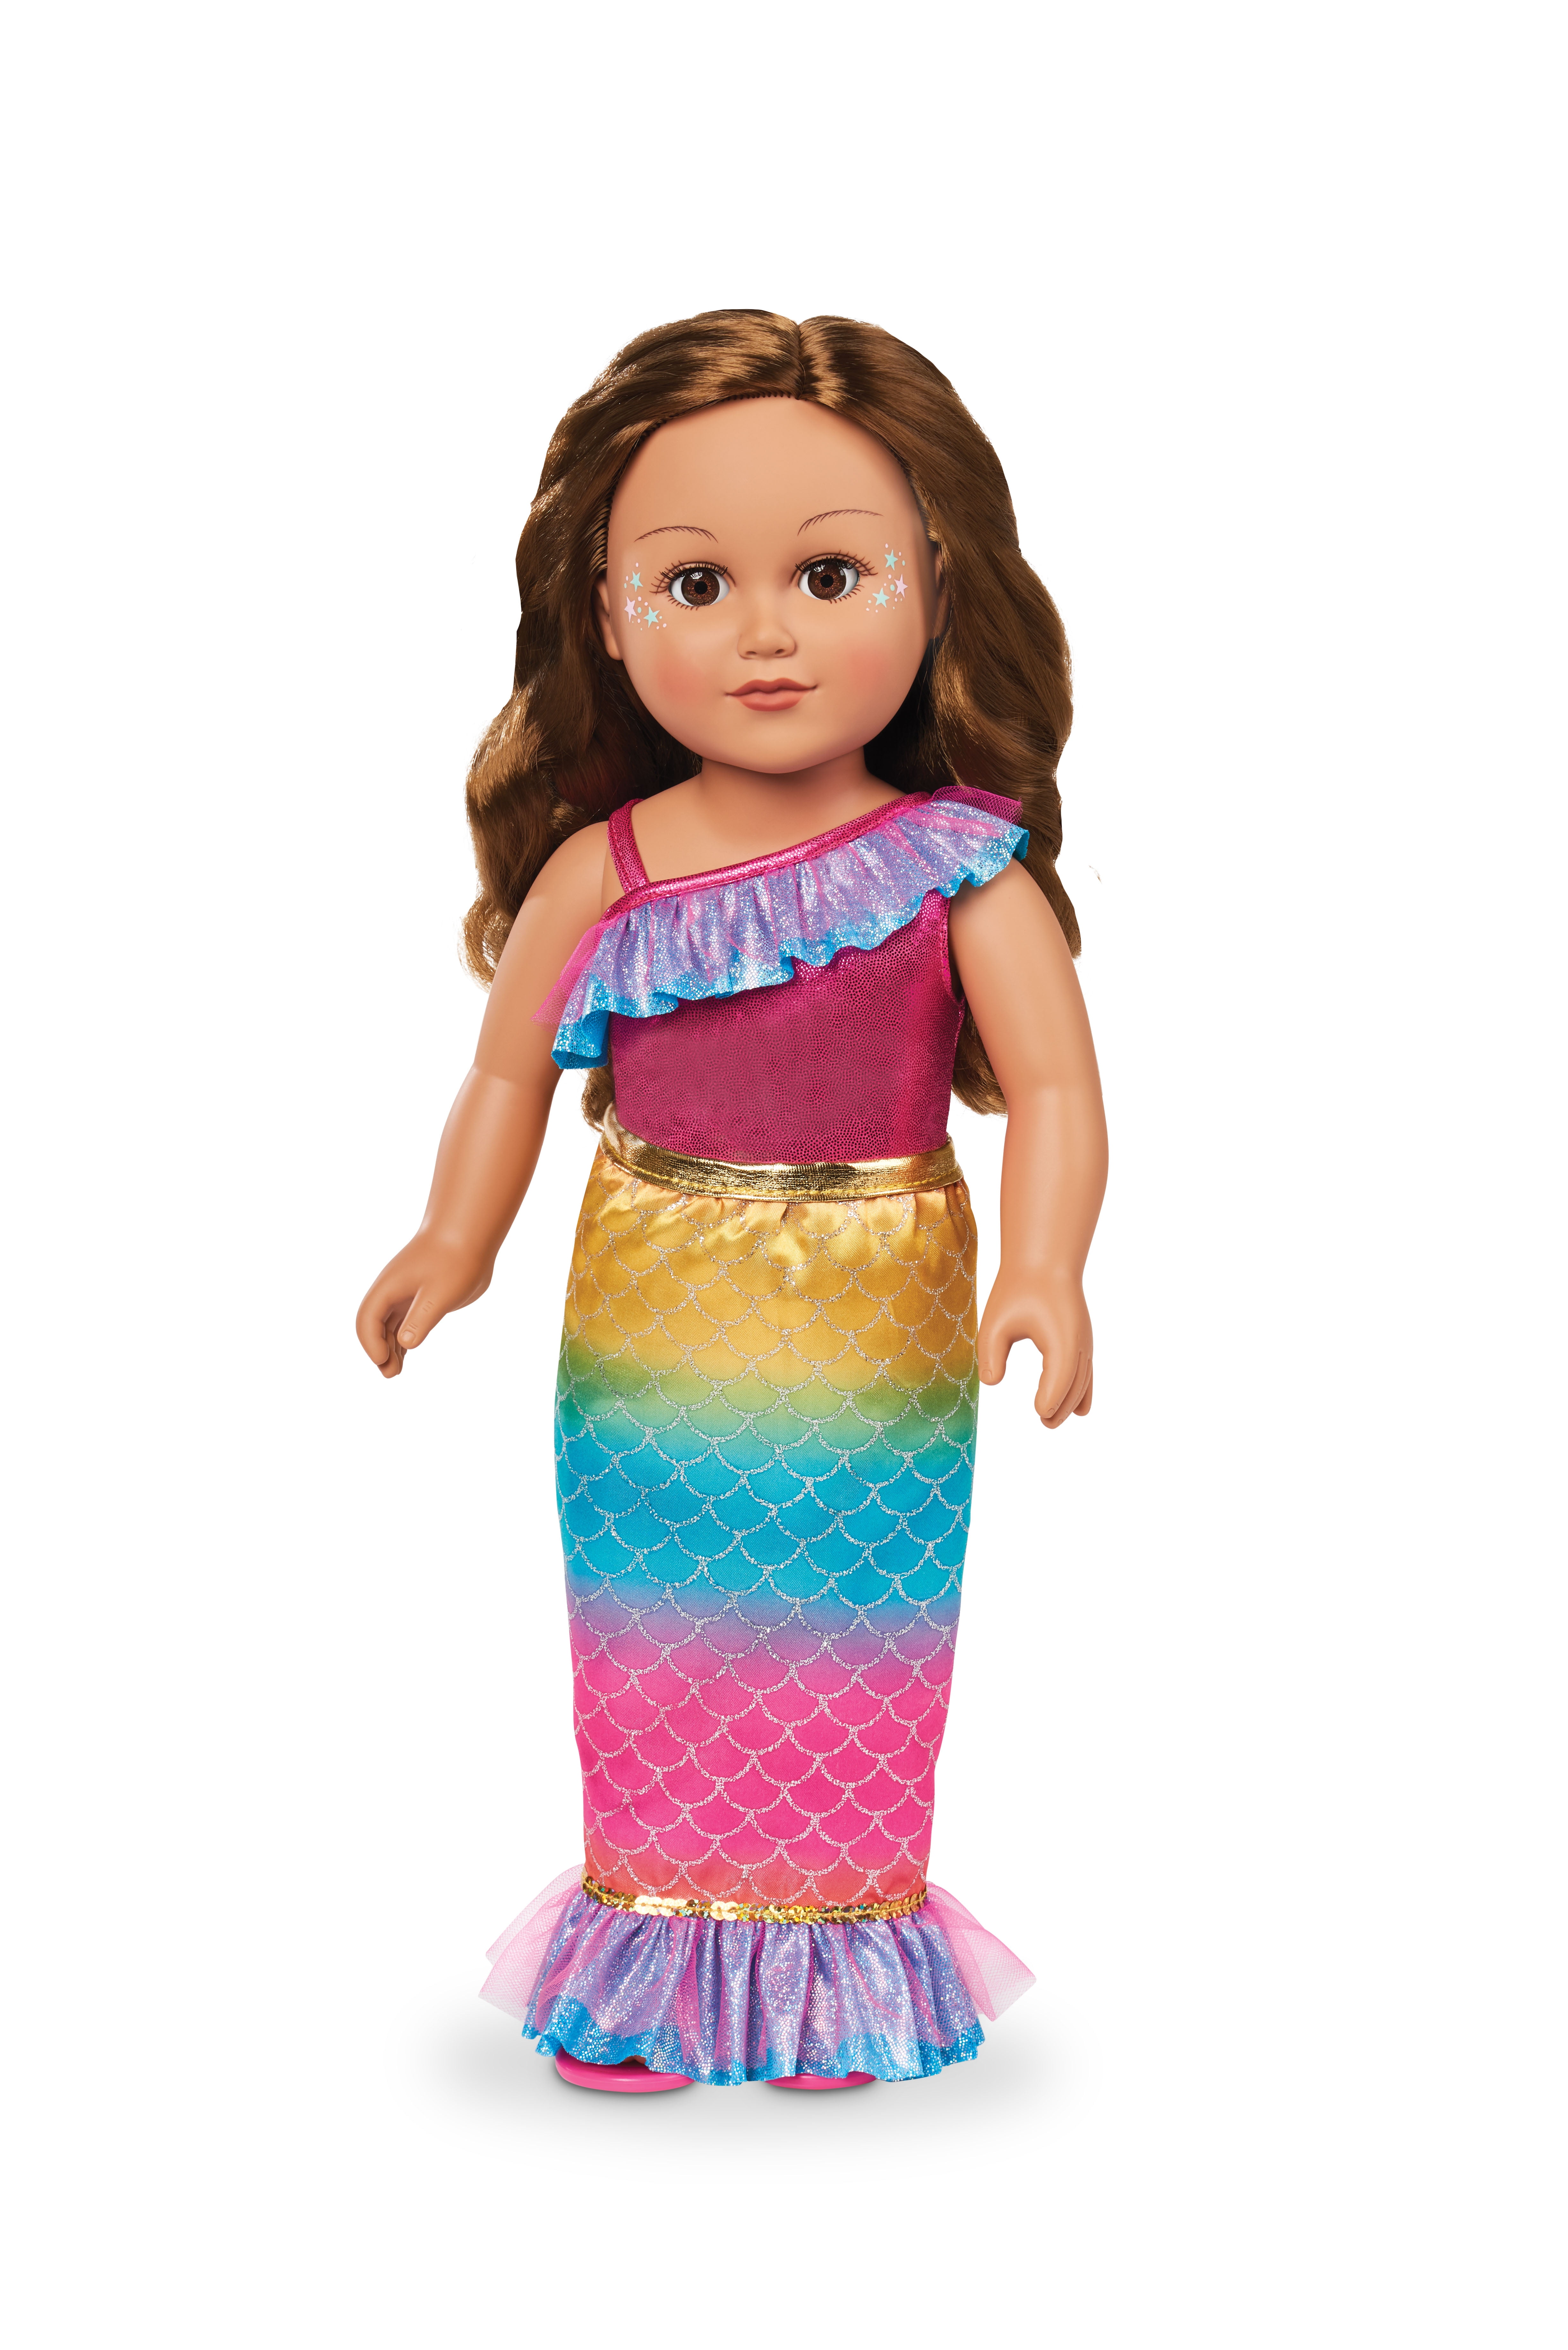 Mermaid Princess Dolls Set of 3 Girls Toys Accessories Play Time Fun Gift Toy for sale online 